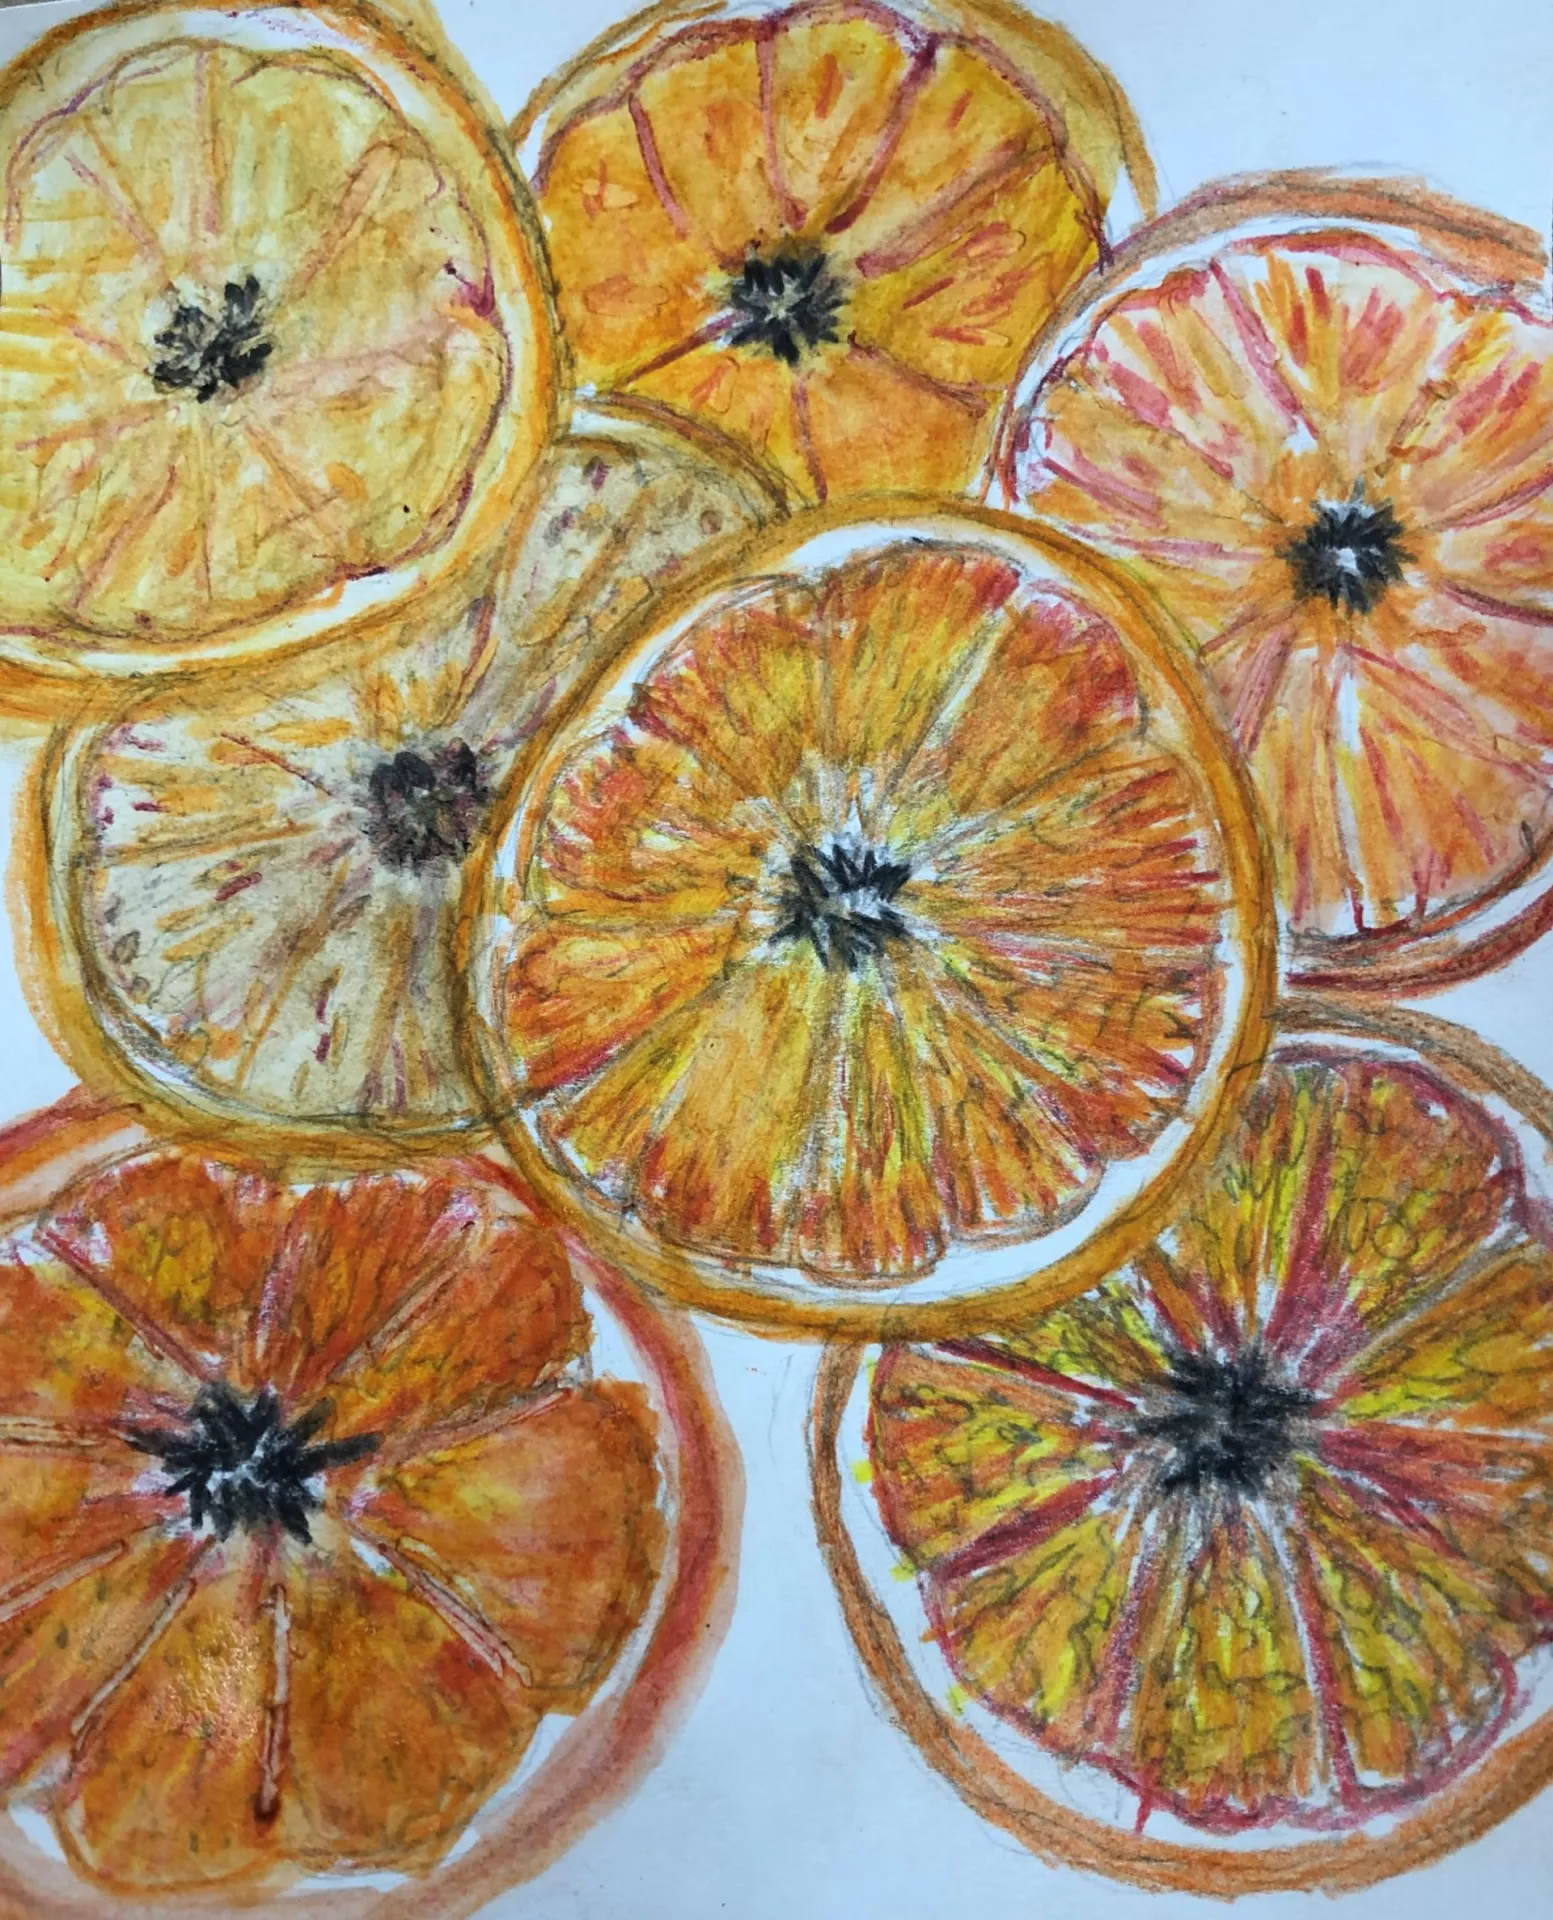 This piece is a watercolor pencil drawing of 7 overlapping circular slices of various types of oranges, colored in tones of red, orange, and yellow, with the rinds and juicy interior bits of the orange flesh easily seen as a part of each slice.